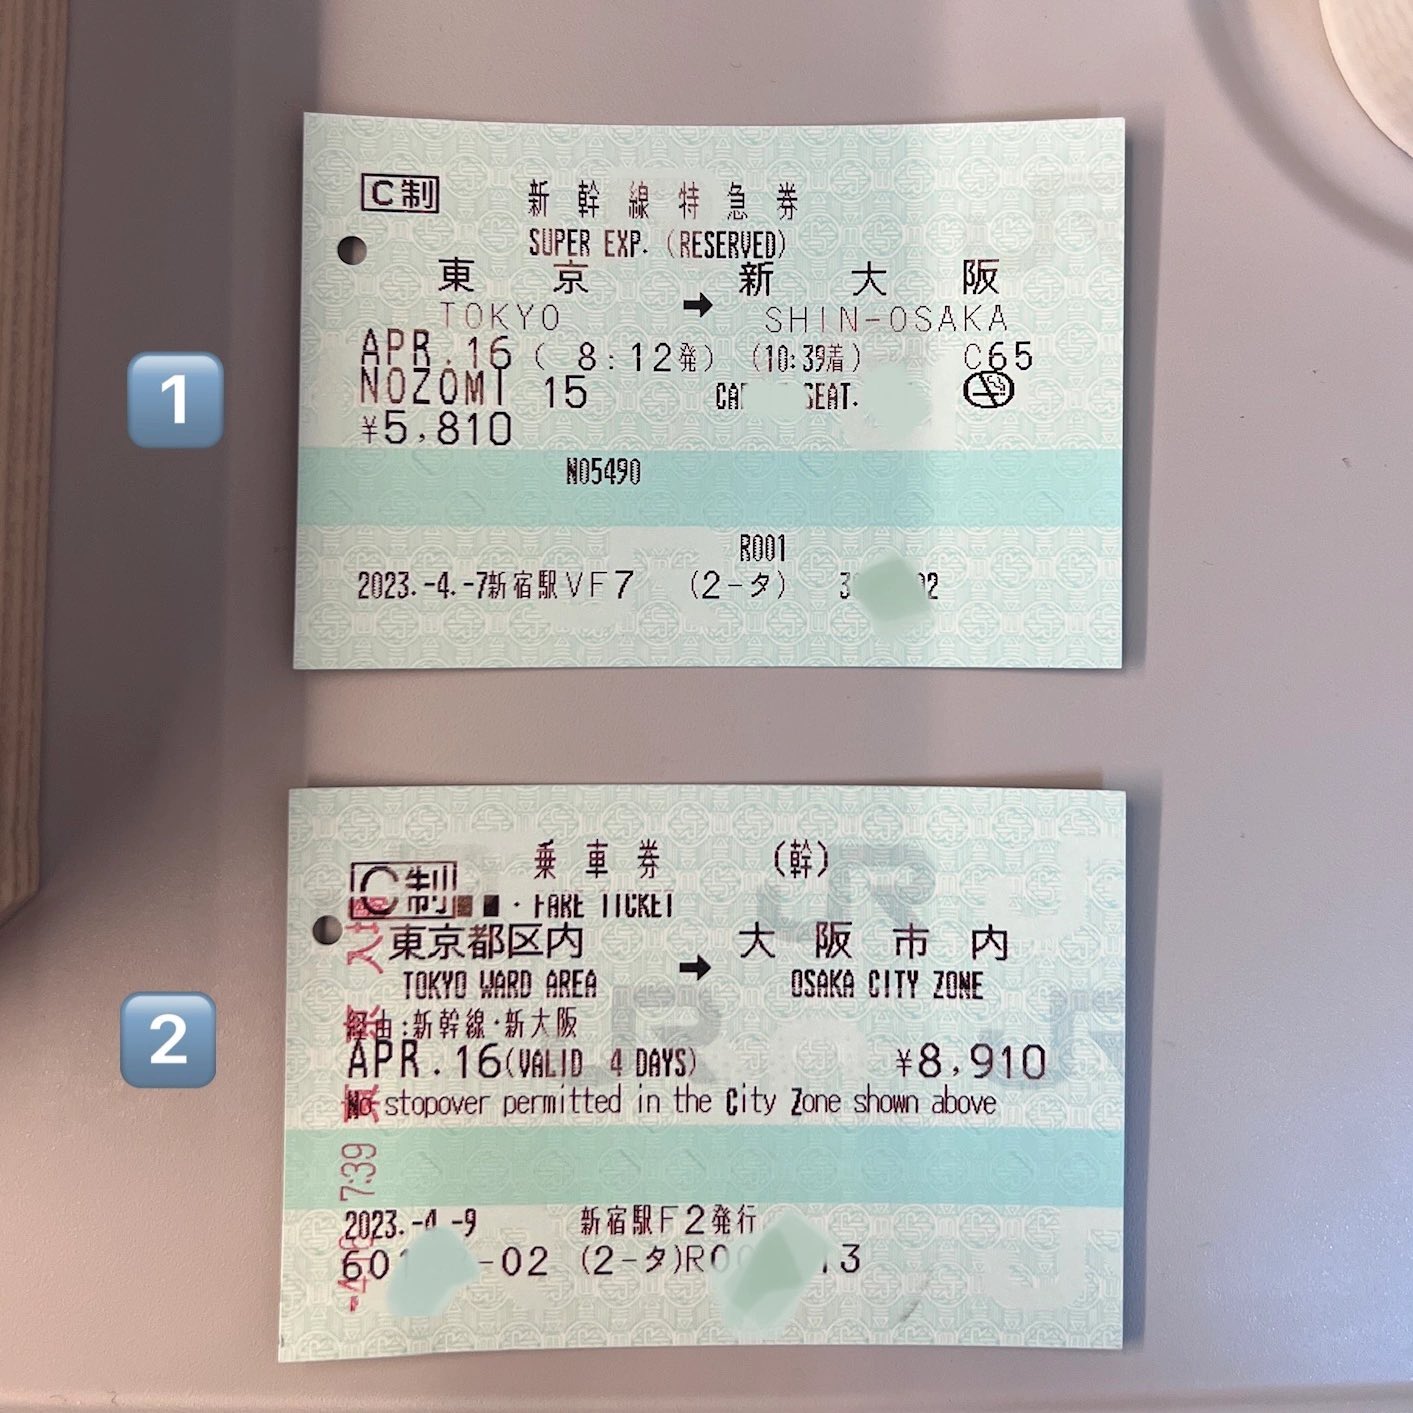 the train tickets